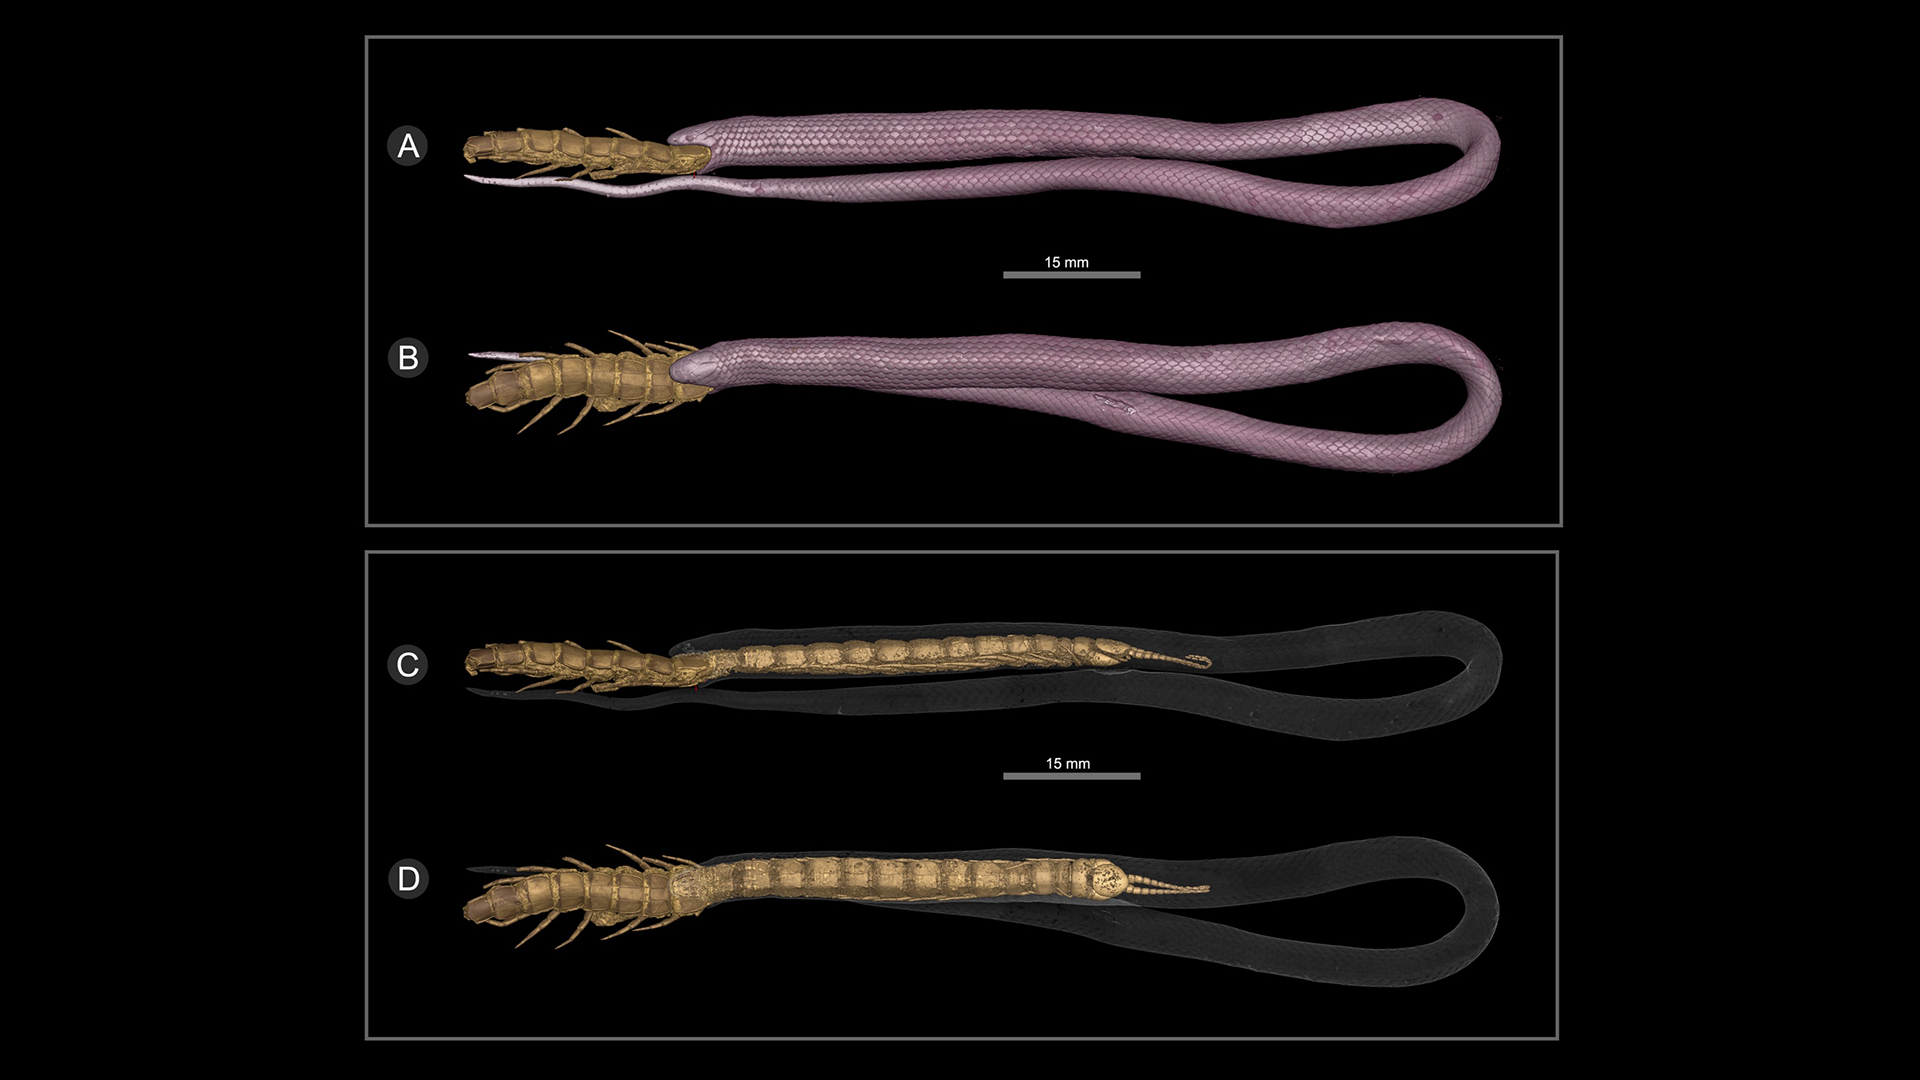 The excellent condition of the snake's soft tissues enabled CT scans to reveal its internal structures in exceptional detail.